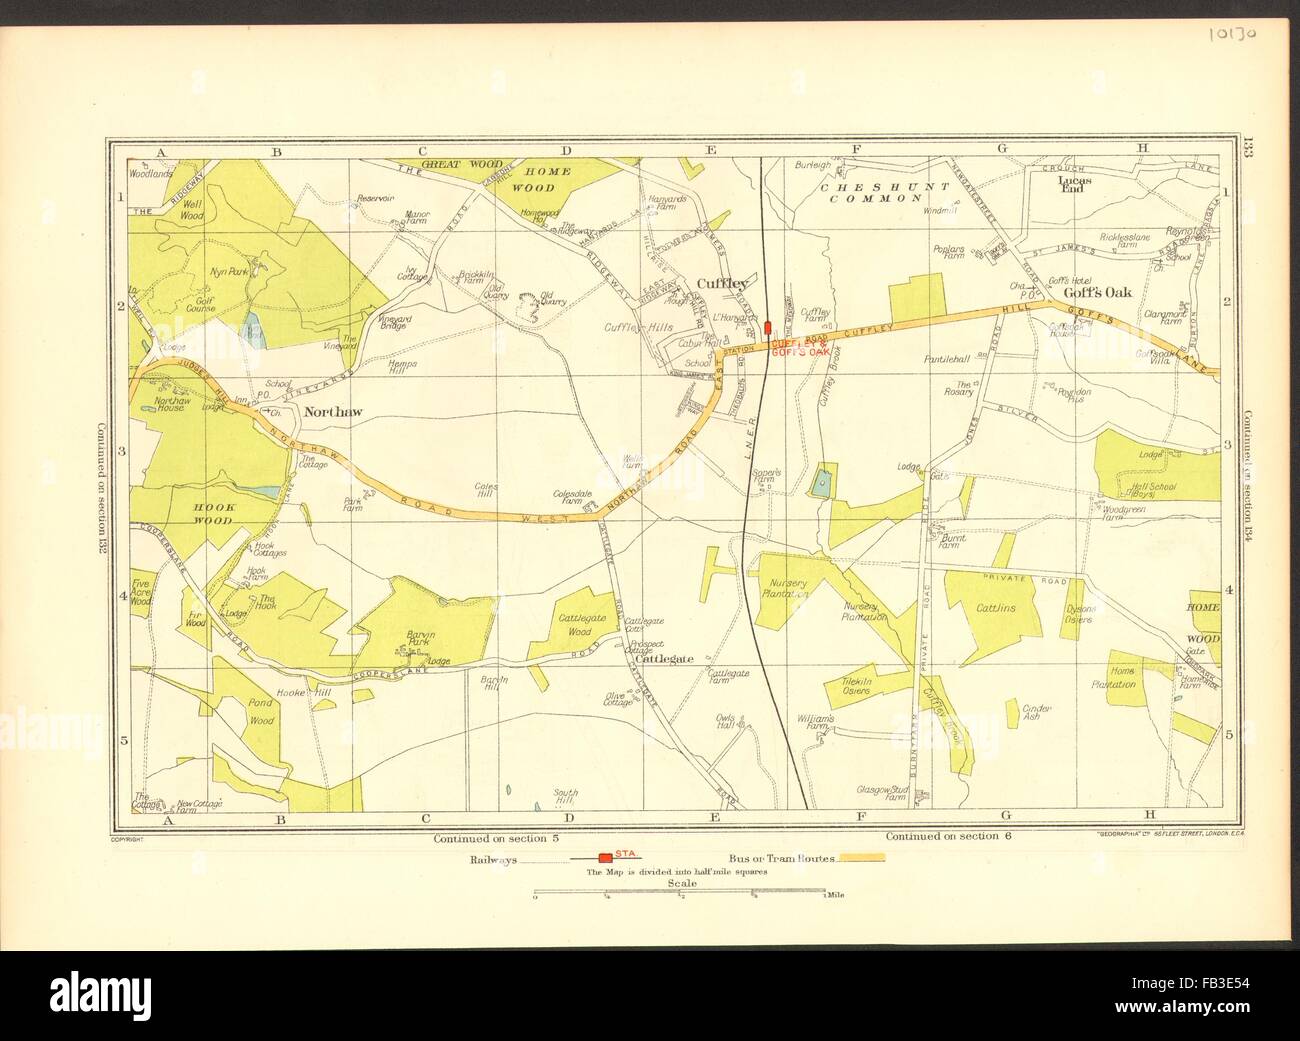 HERTFORDSHIRE: Cuffley, Goff di rovere, Northaw, Potters Bar, 1937 Vintage map Foto Stock